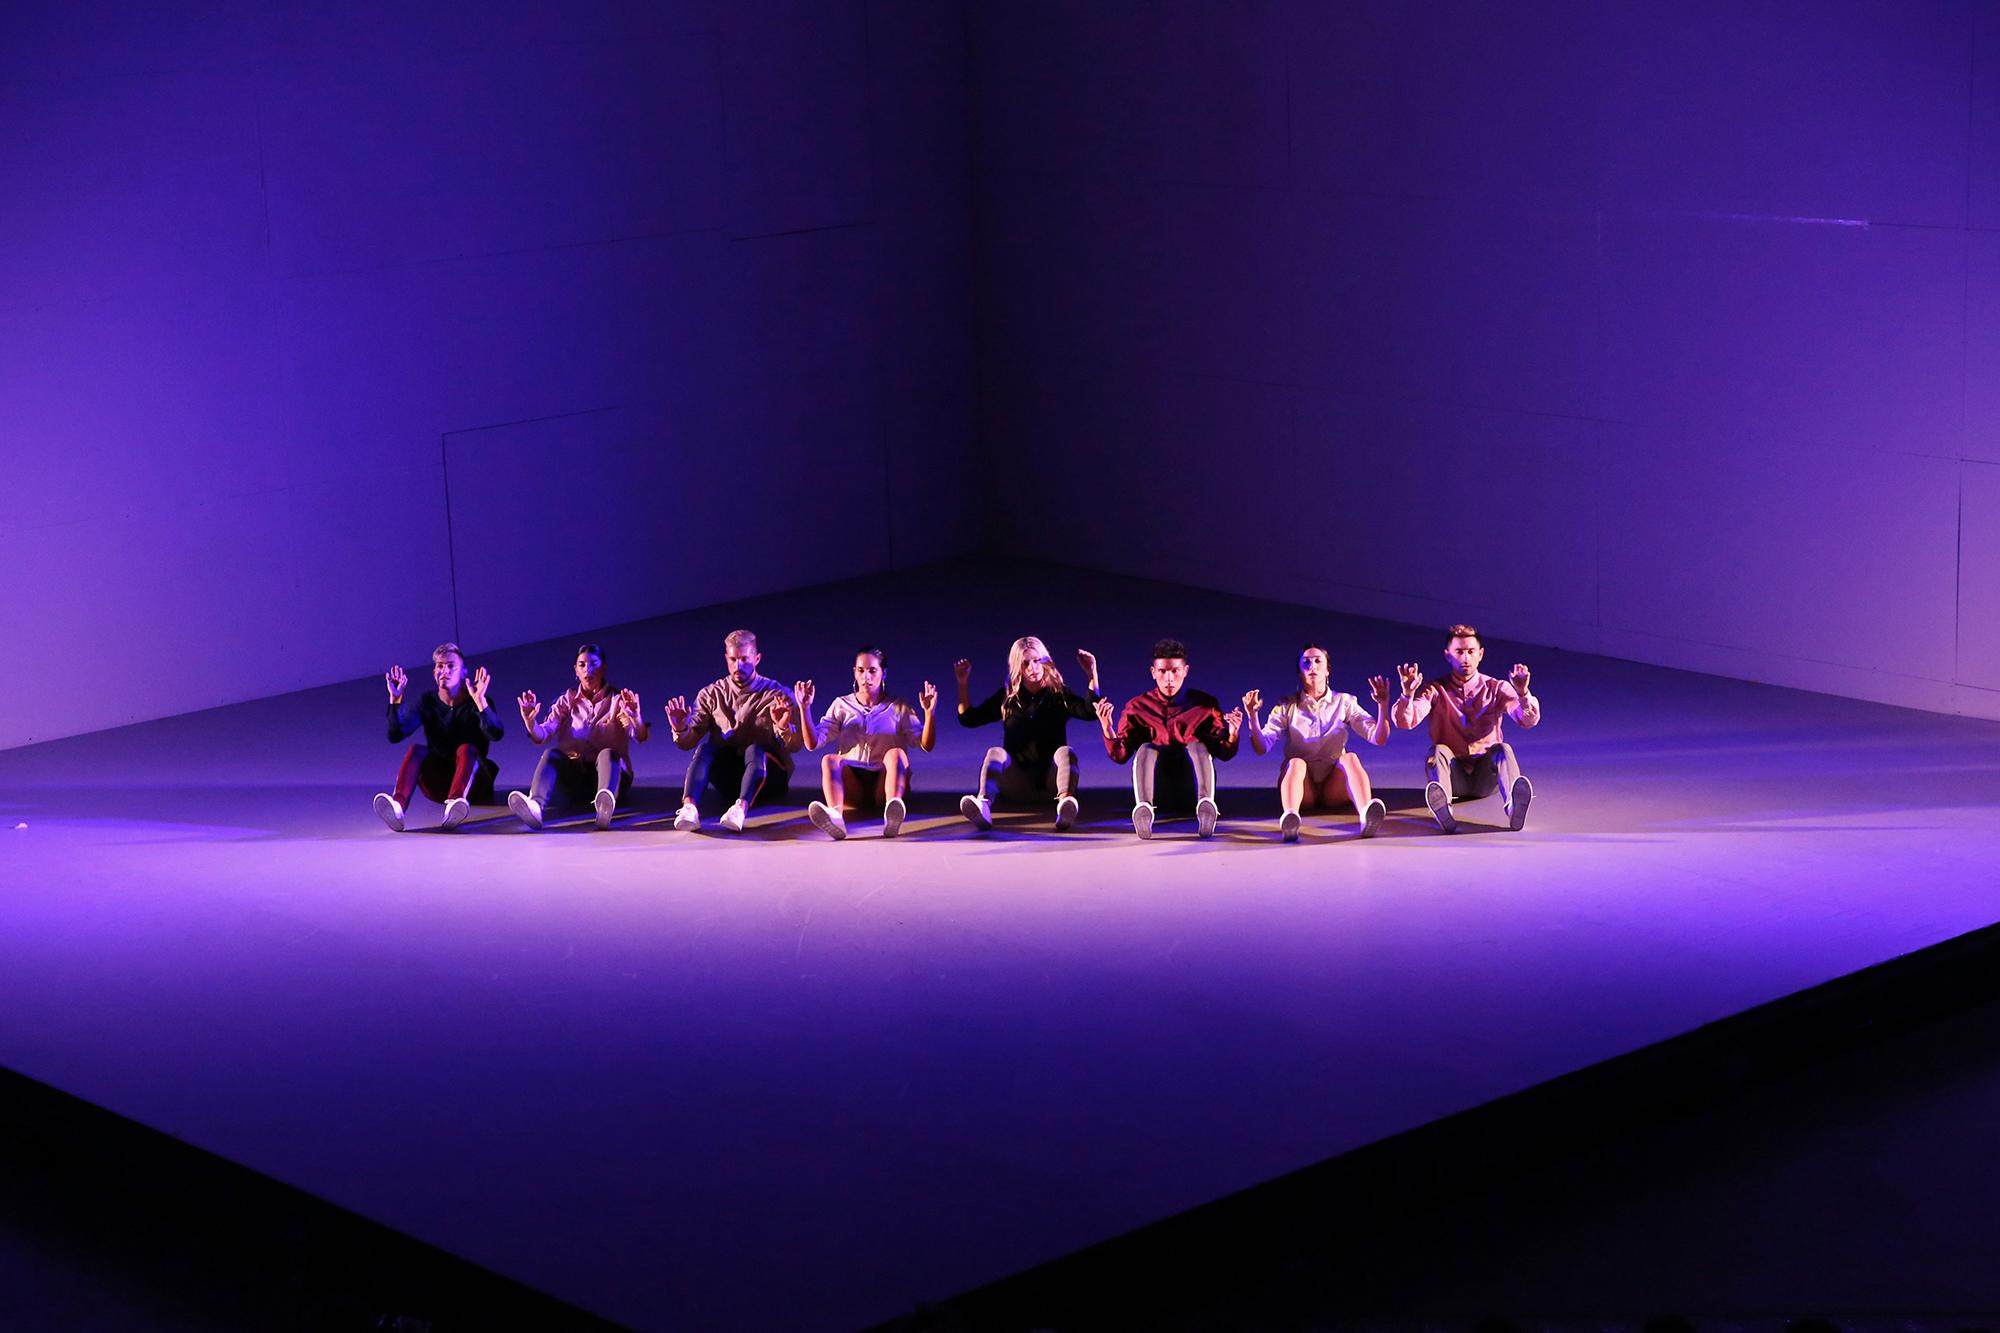 8 dancers sit in a line on the cube shaped stage with their palms out facing the audience. The stage is lit in lavender.